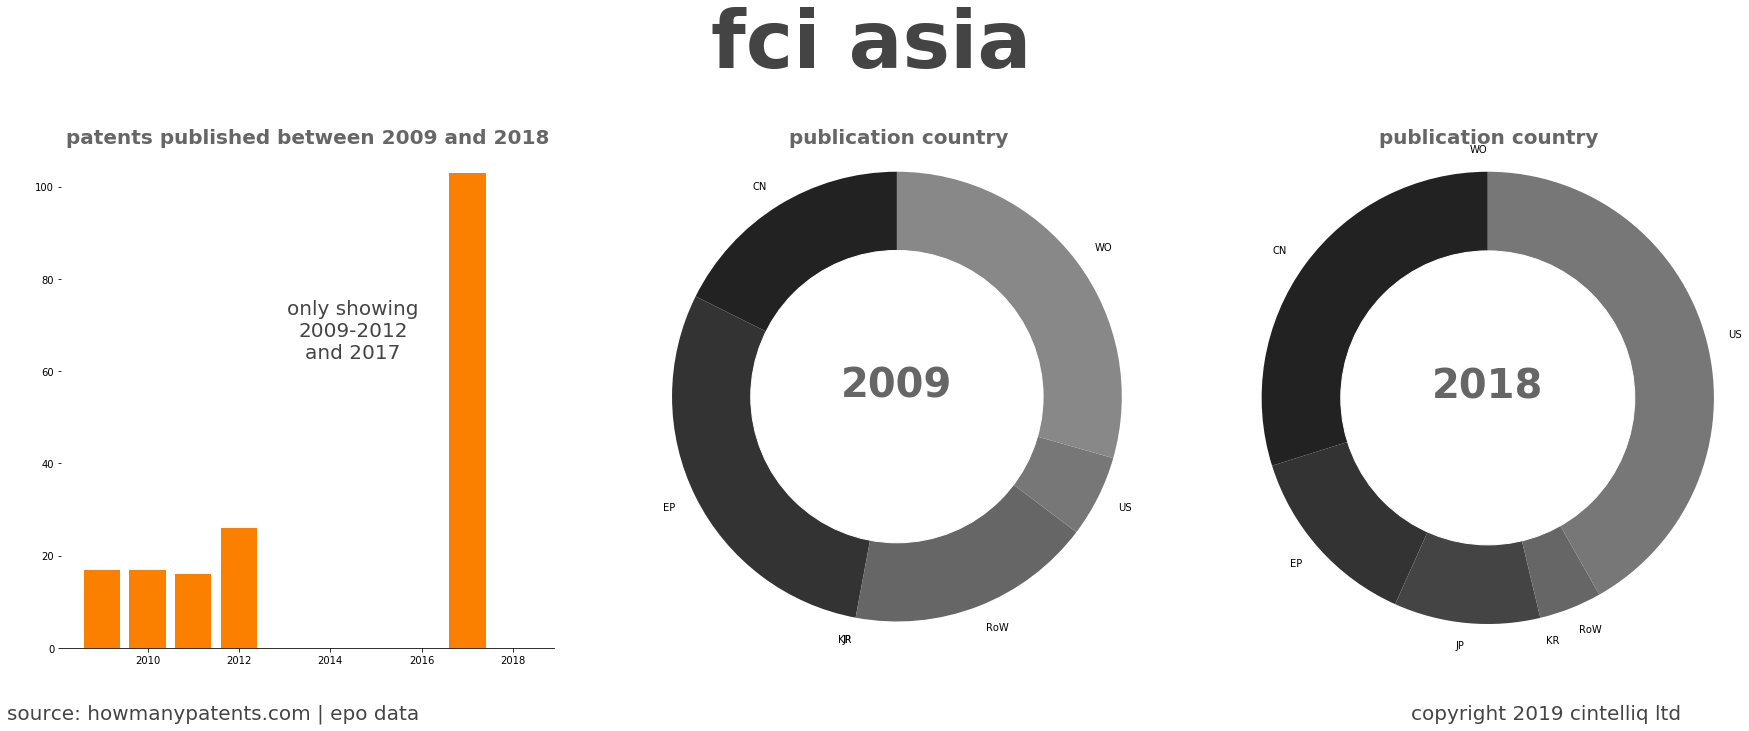 summary of patents for Fci Asia